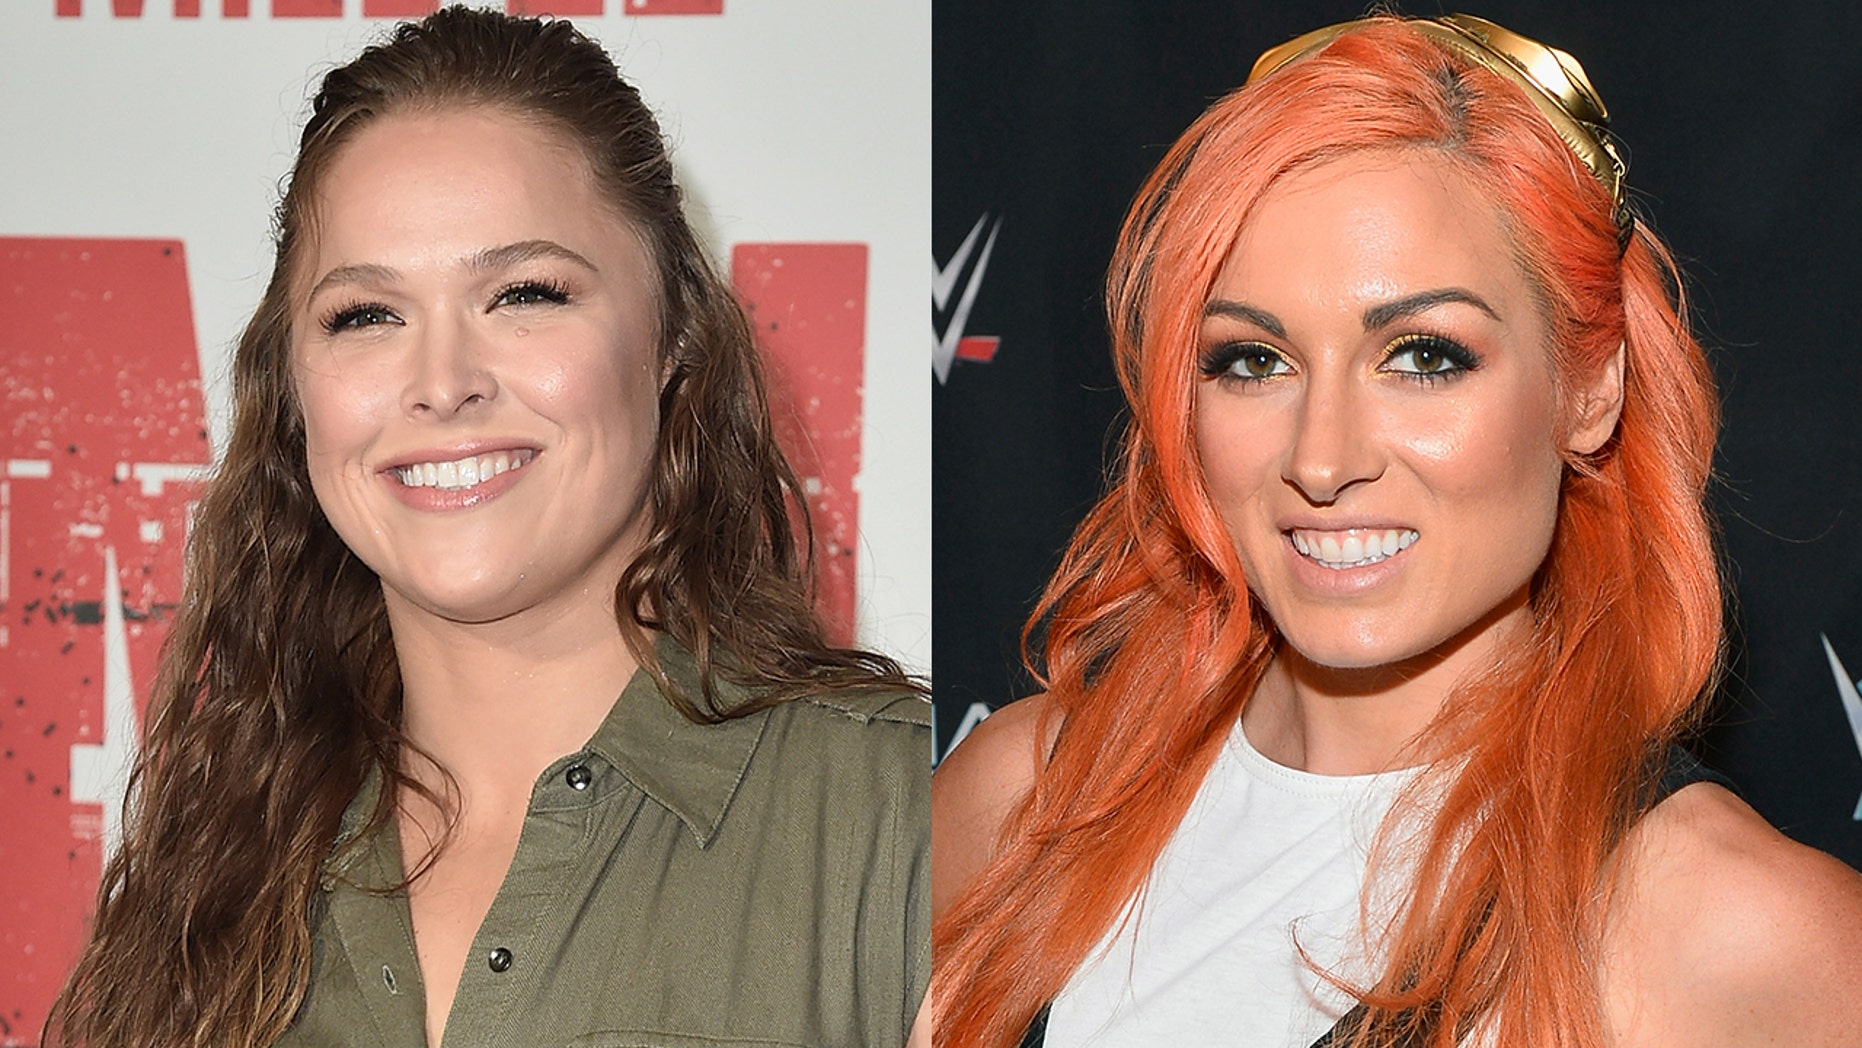 Ronda Rousey exchanged heated words with WWE rival Becky Lynch.